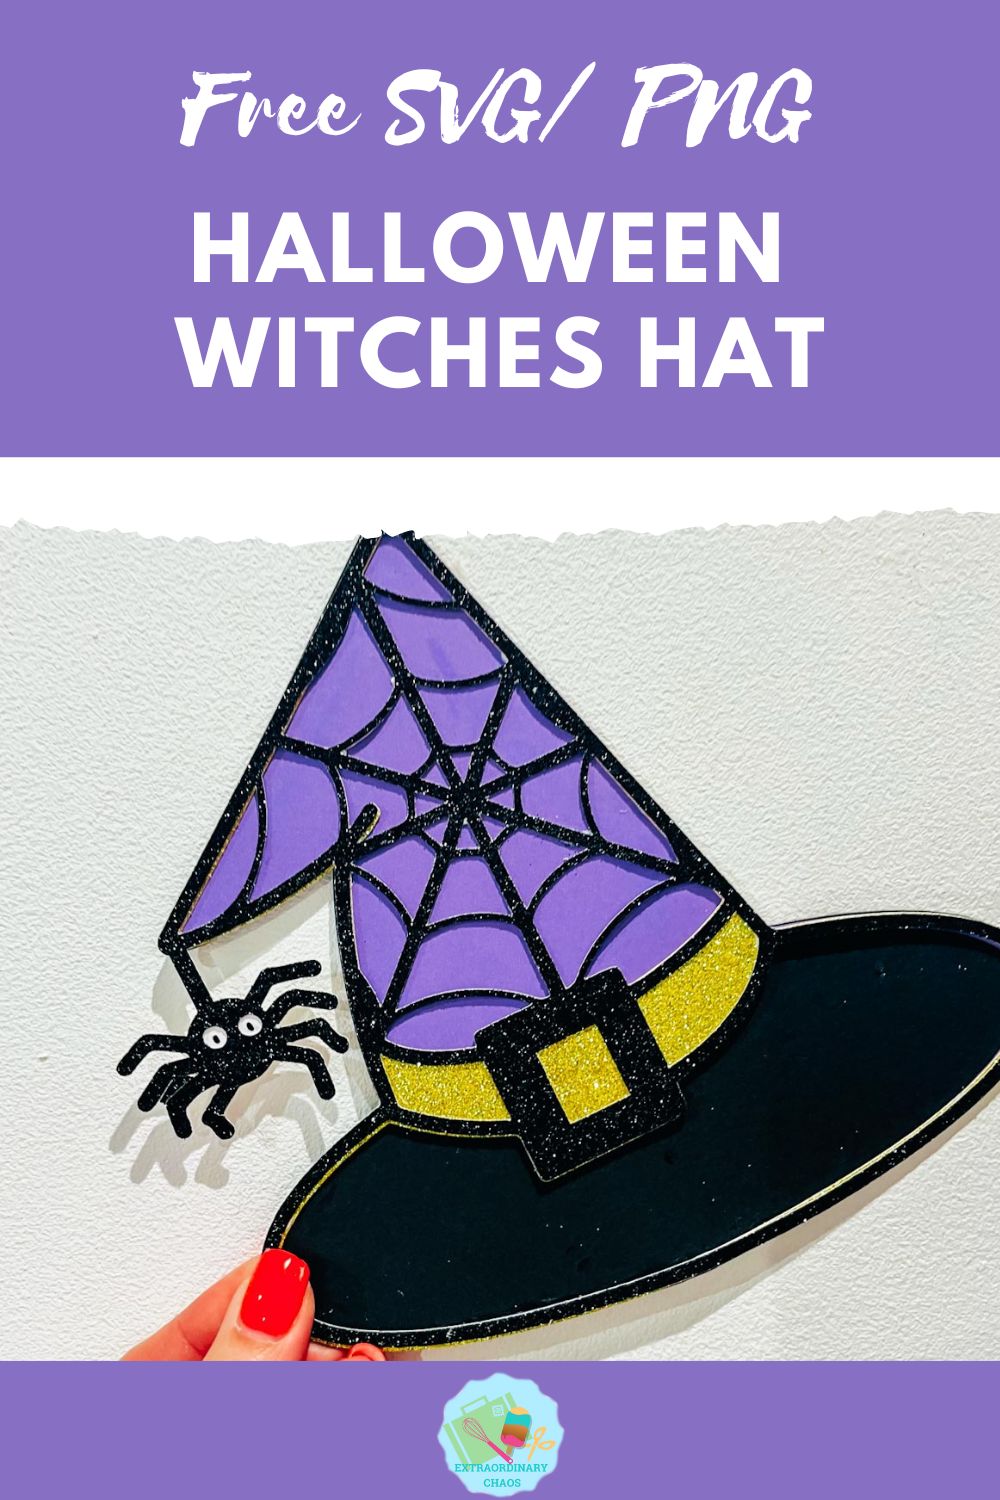 Free Halloween Witches Hat file SVG, PNG for Cricut, Glowforge